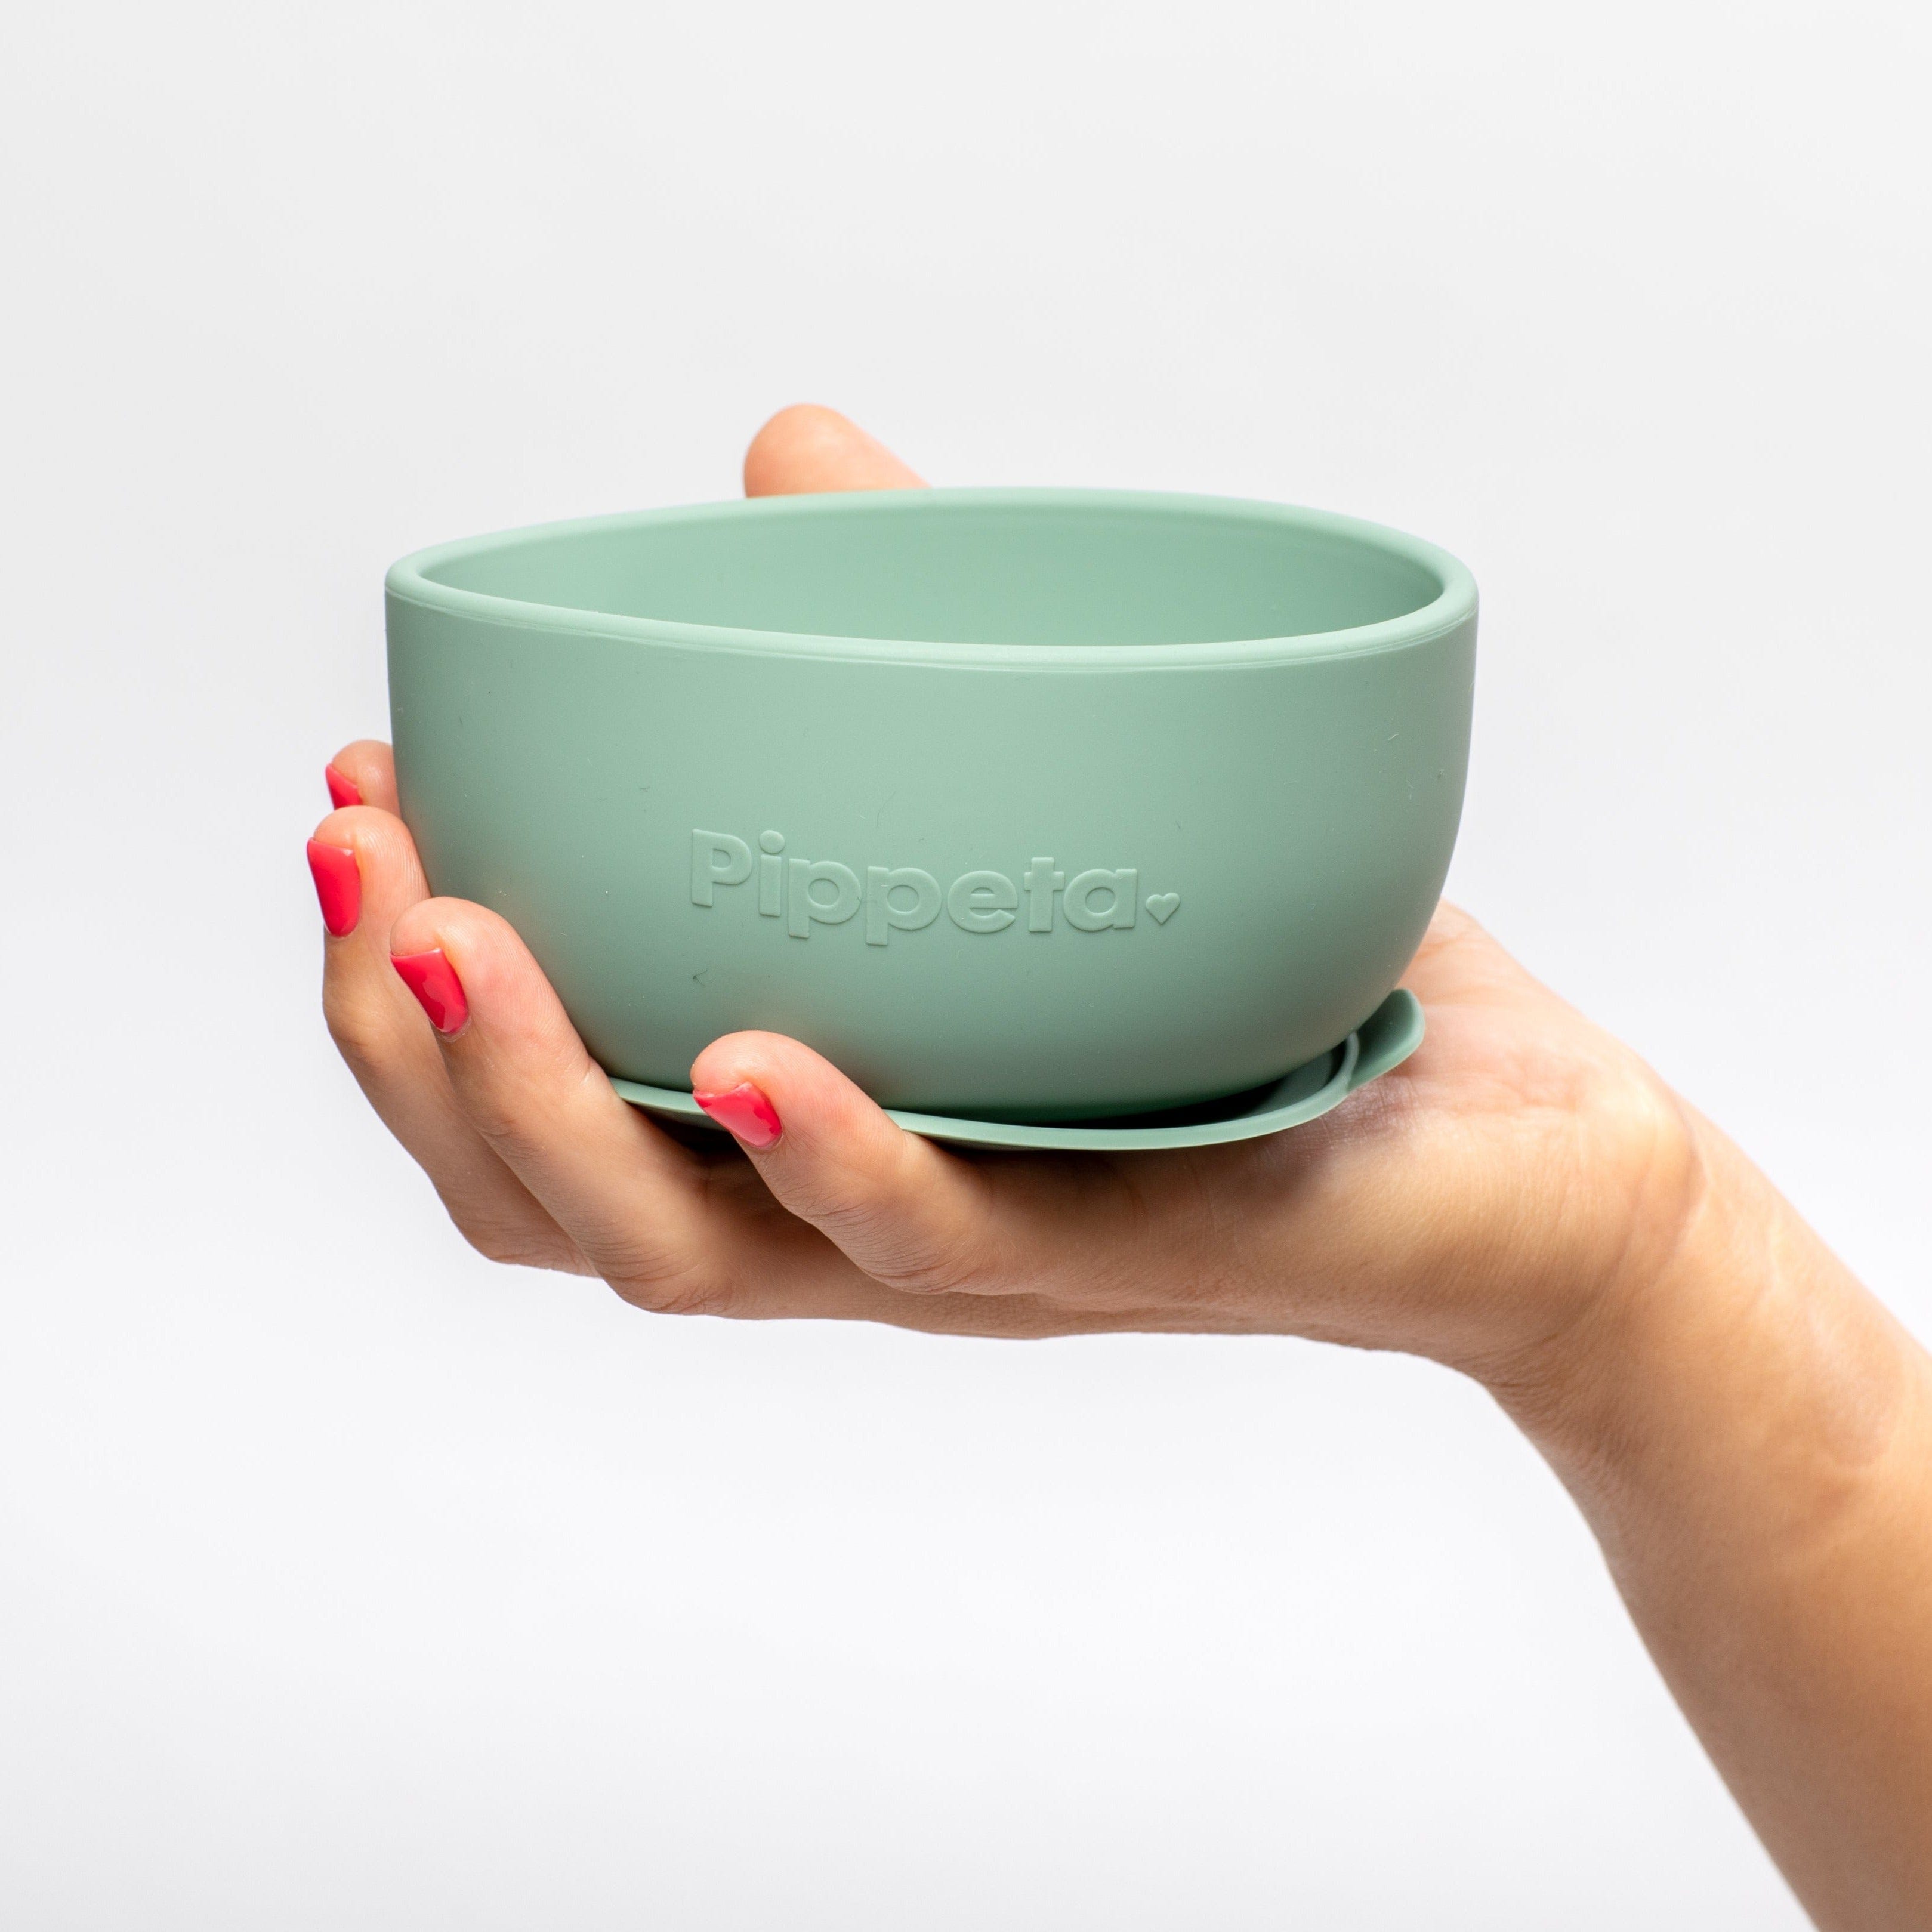 Pippeta Weaning Bowl Silicone Suction Bowl (Meadow Green)